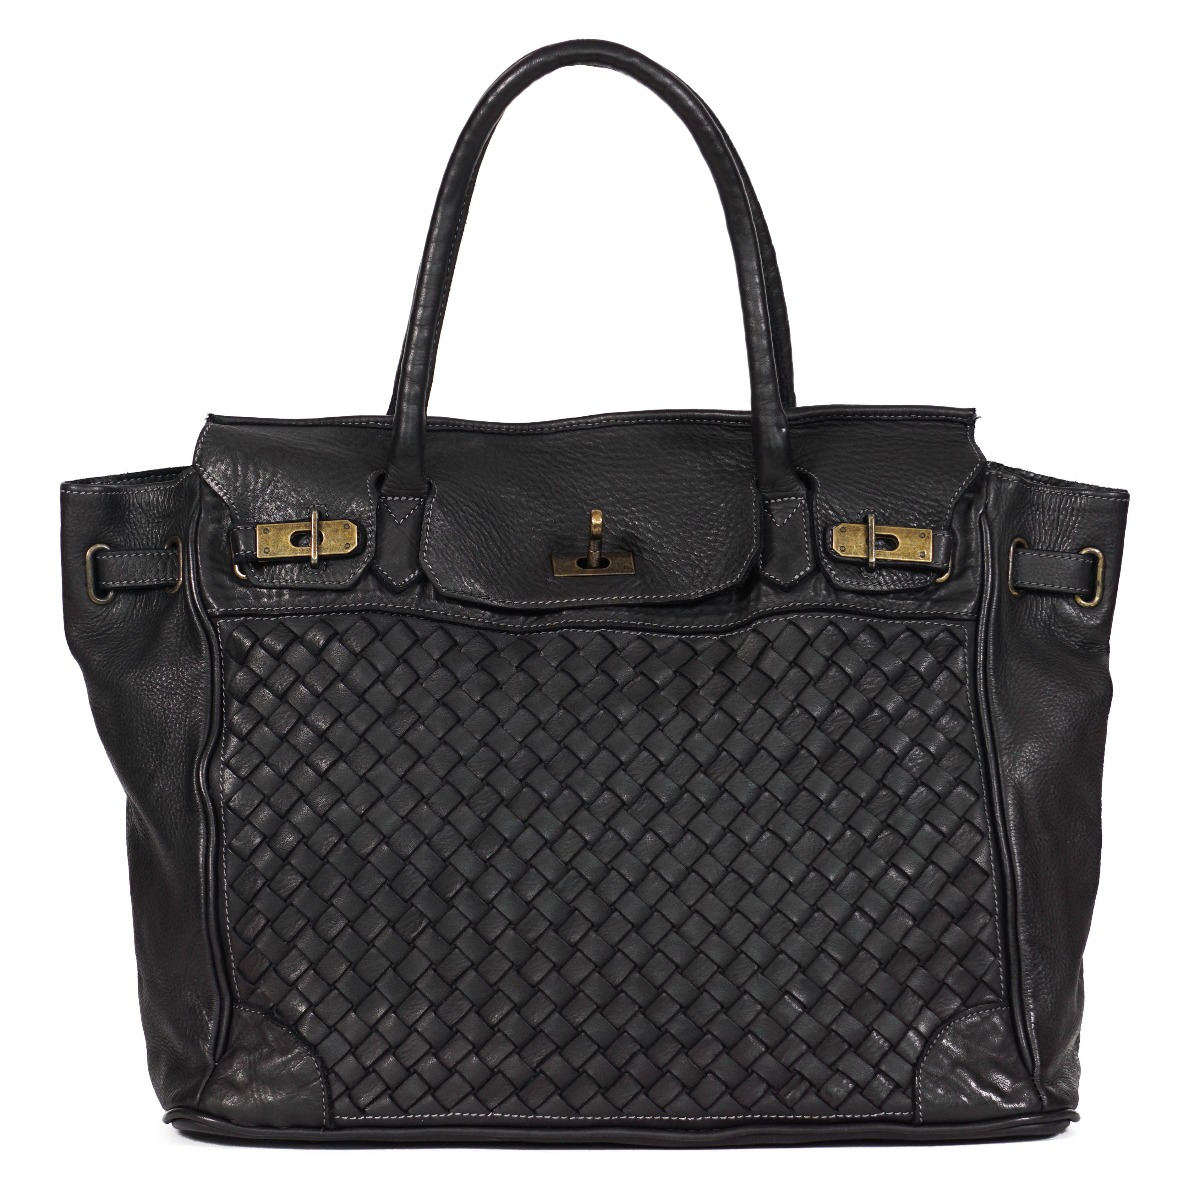 Woven leather tote bag - black